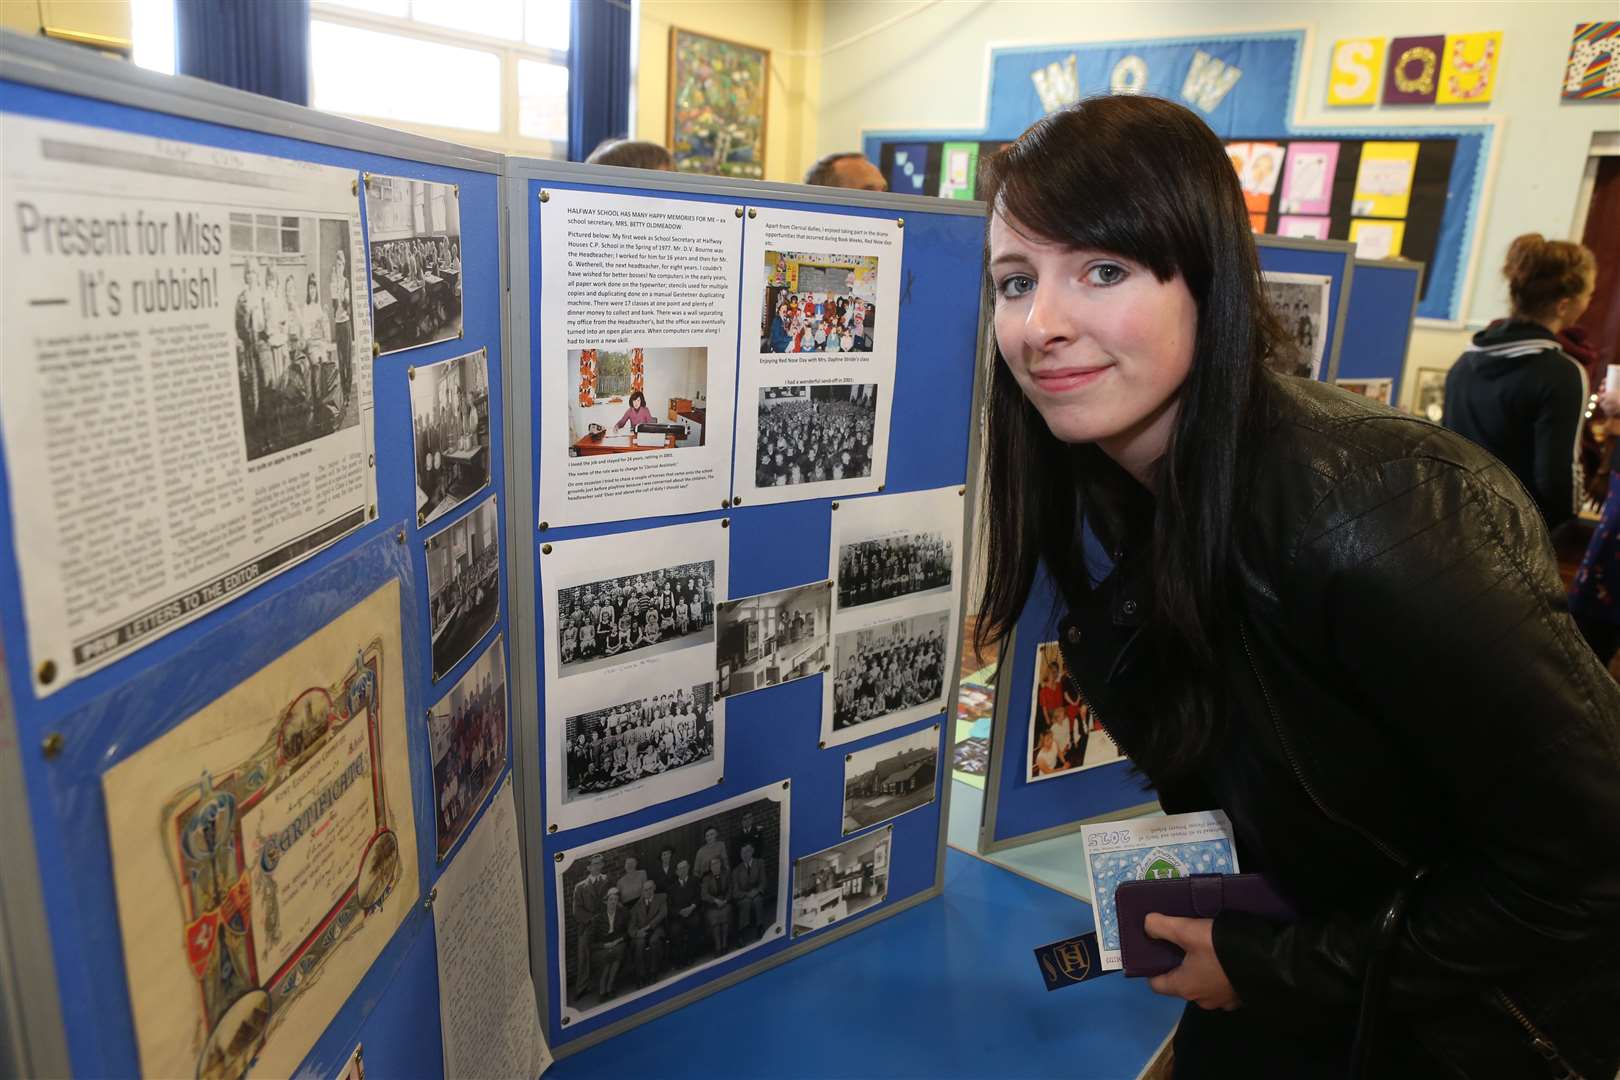 Gemma Wilmshurst, who was a pupil between 1990-1994, looks at a memory display at Halfway Houses Primary School